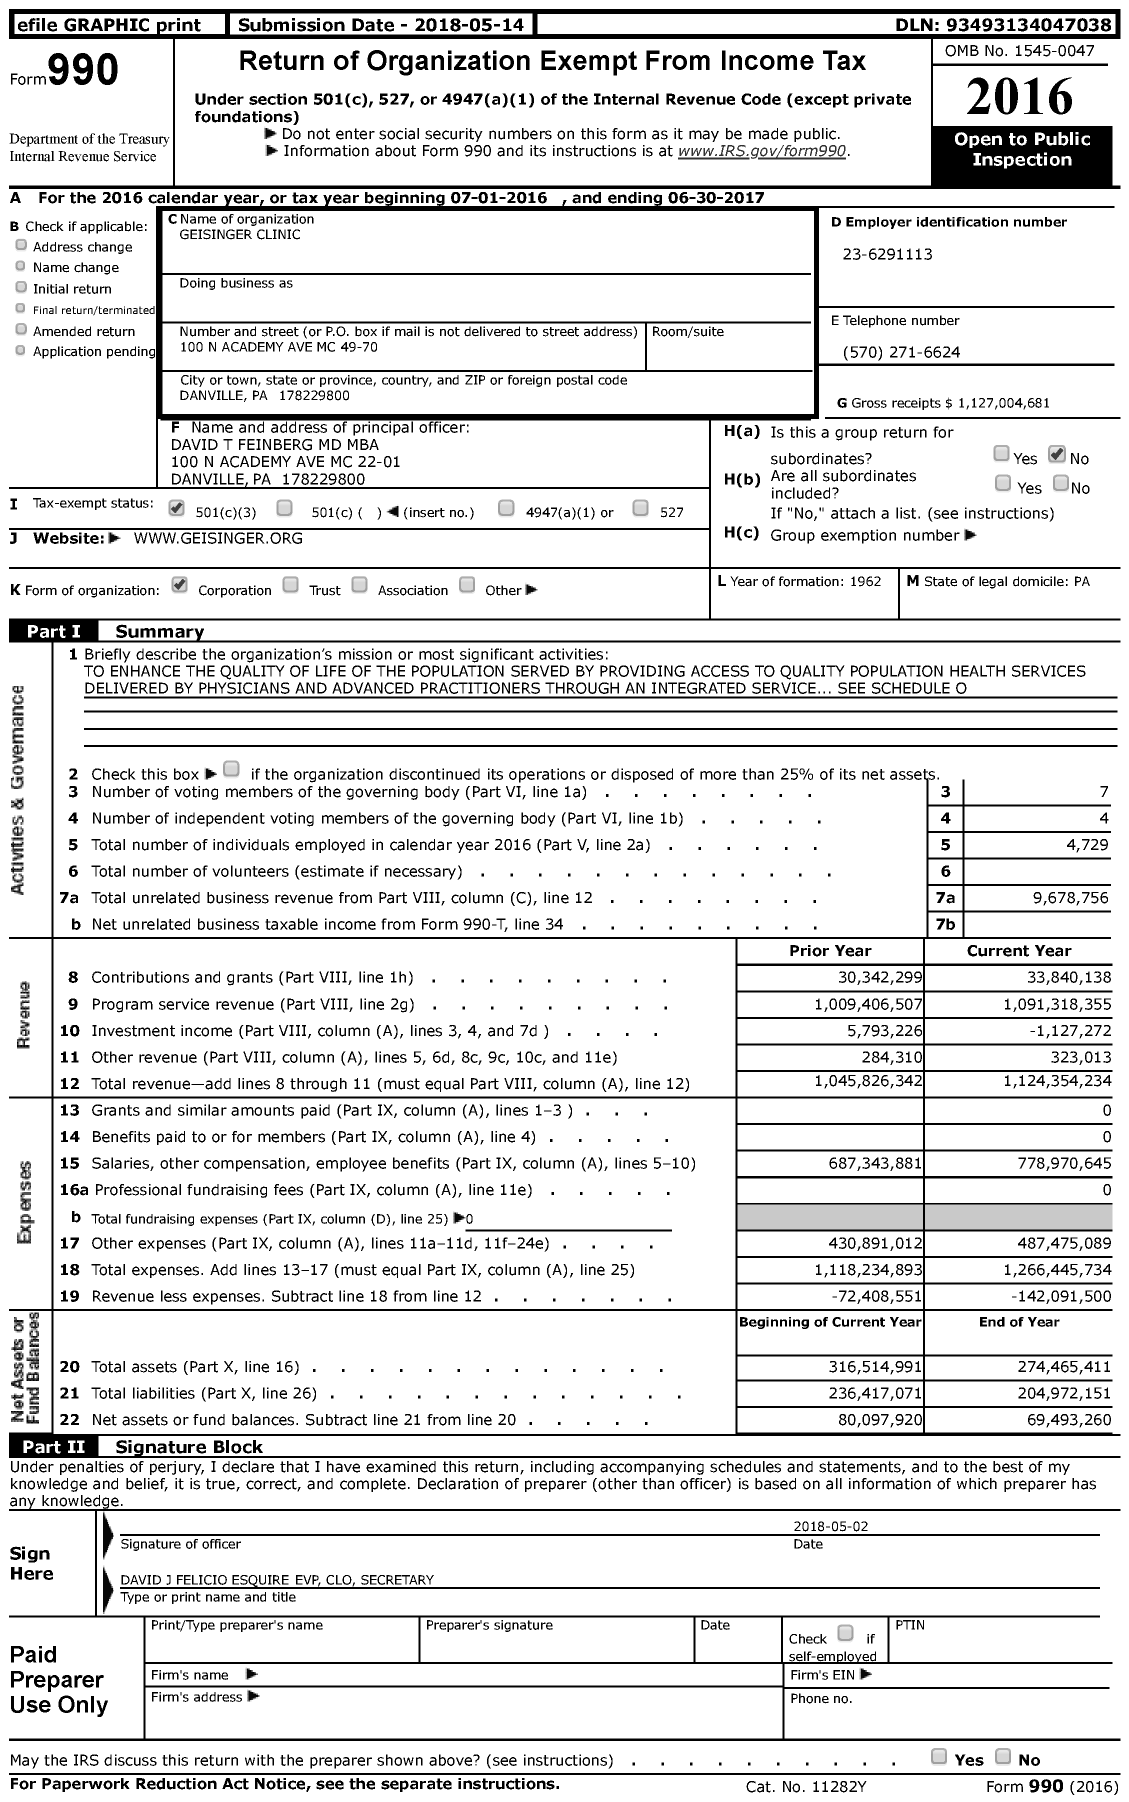 Image of first page of 2016 Form 990 for Geisinger Health System (GHS)